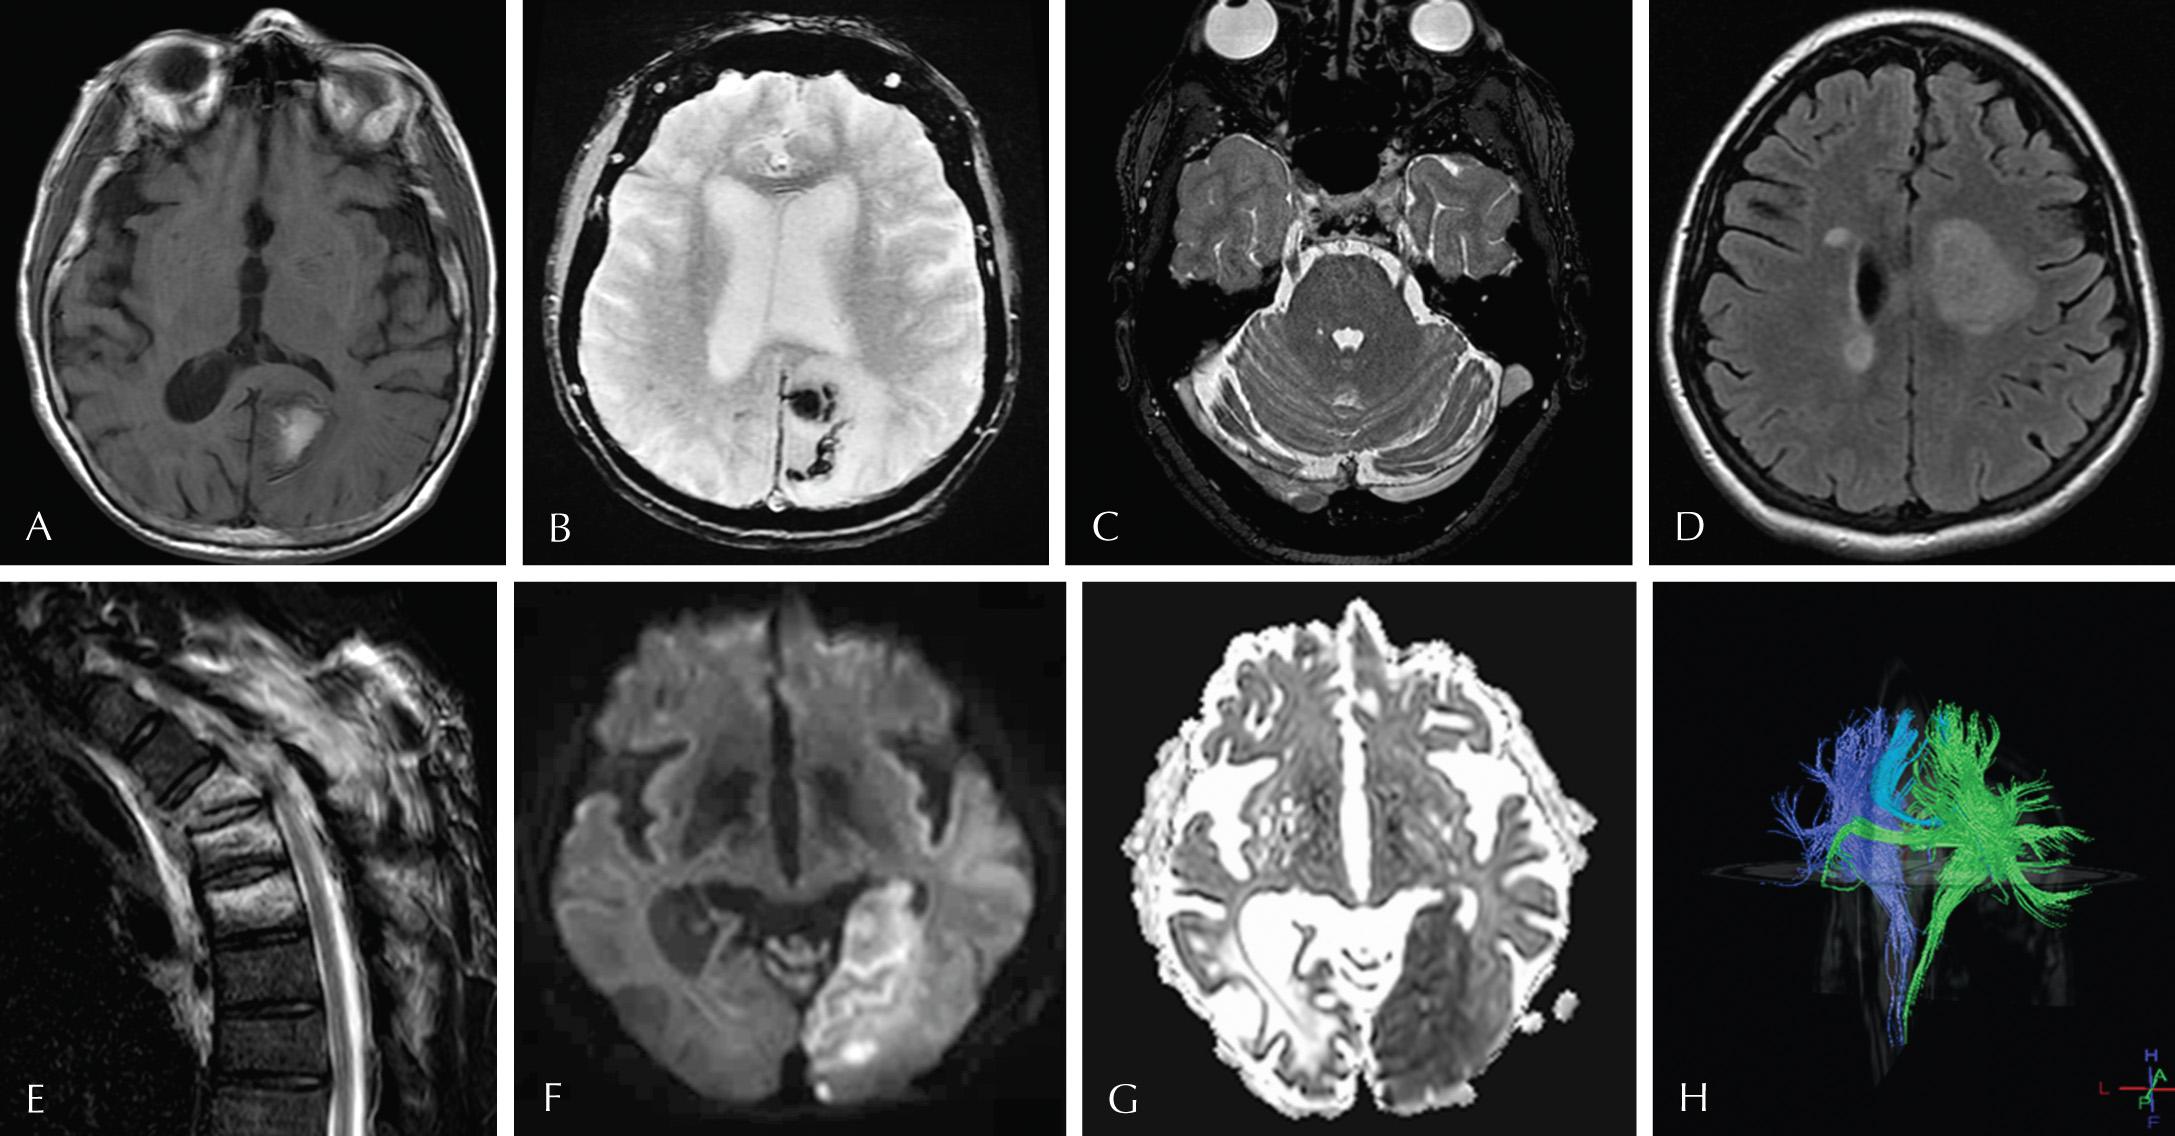 Fig. 3.8, Different magnetic resonance imaging sequences accentuate the differences that tissue injury or disease creates within the central nervous system. Subacute parenchymal hemorrhage in the left parieto-occipital lobe is hyperintense on axial T1-weighted images (A) and shows dark susceptibility artifact due to methemoglobin on gradient echo sequences (B). High-resolution T2-weighted images, as shown here at the level of the trigeminal nerves (C), is useful for evaluating vessels and cranial nerves which are surrounded by T2 hyperintense cerebrospinal fluid. Fluid attenuation inversion recovery sequences are very useful for evaluating the white matter, as seen in this patient with multiple sclerosis, “tumefactive” on the left (D). Short tau inversion recovery images are very useful for evaluating marrow edema in the background of marrow fat, as in this case of several compression fractures in the thoracic spine (E). Diffusion-weighted imaging (F) and apparent diffusion coefficient (G) maps are invaluable for early assessment of acute infarction, as seen in this acute left posterior cerebral territory infarct. Lastly, information obtained using diffusion tensor imaging can be used to create a three-dimensional model of white matter tracts, a process called diffusion tractography (H).